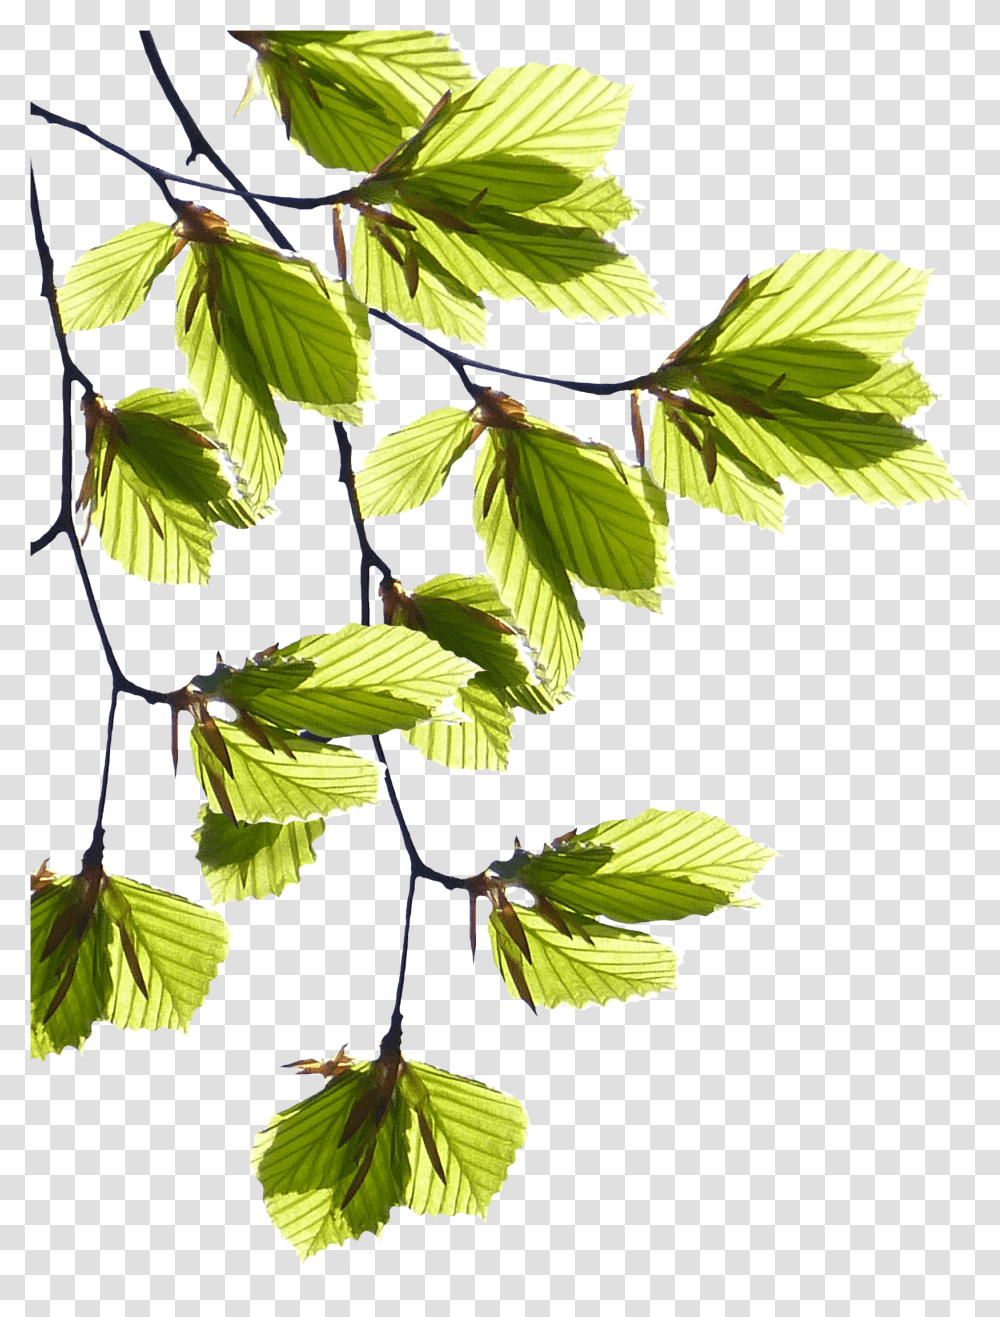 Tree Branches With Leaves, Leaf, Plant, Veins, Potted Plant Transparent Png